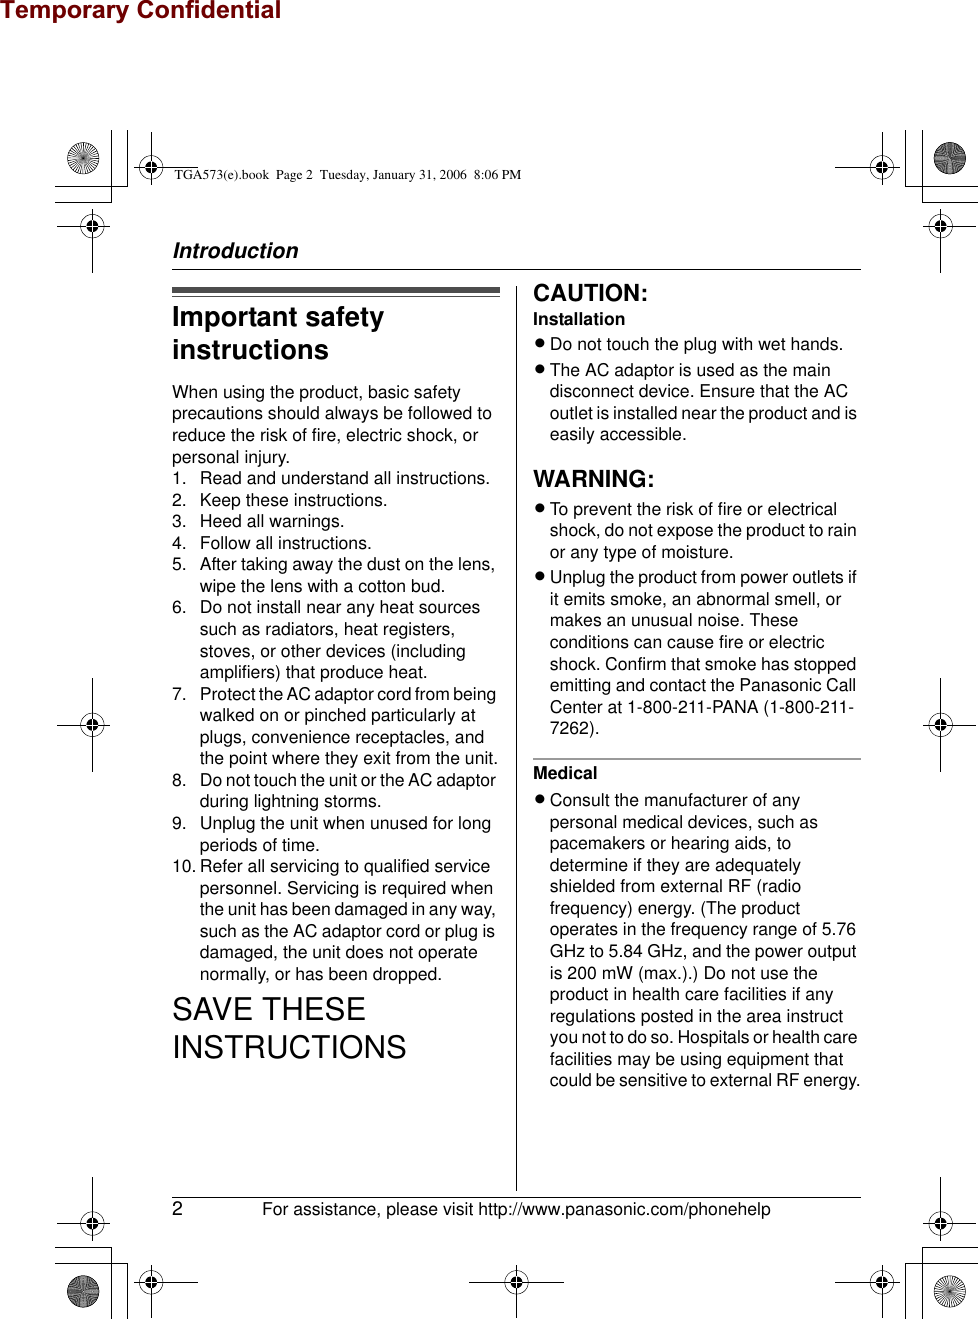 Temporary ConfidentialIntroduction2For assistance, please visit http://www.panasonic.com/phonehelpImportant safety instructionsWhen using the product, basic safety precautions should always be followed to reduce the risk of fire, electric shock, or personal injury.1. Read and understand all instructions.2. Keep these instructions.3. Heed all warnings.4. Follow all instructions.5. After taking away the dust on the lens, wipe the lens with a cotton bud.6. Do not install near any heat sources such as radiators, heat registers, stoves, or other devices (including amplifiers) that produce heat.7. Protect the AC adaptor cord from being walked on or pinched particularly at plugs, convenience receptacles, and the point where they exit from the unit.8. Do not touch the unit or the AC adaptor during lightning storms.9. Unplug the unit when unused for long periods of time.10. Refer all servicing to qualified service personnel. Servicing is required when the unit has been damaged in any way, such as the AC adaptor cord or plug is damaged, the unit does not operate normally, or has been dropped.SAVE THESE INSTRUCTIONSCAUTION:InstallationLDo not touch the plug with wet hands.LThe AC adaptor is used as the main disconnect device. Ensure that the AC outlet is installed near the product and is easily accessible.WARNING:LTo prevent the risk of fire or electrical shock, do not expose the product to rain or any type of moisture.LUnplug the product from power outlets if it emits smoke, an abnormal smell, or makes an unusual noise. These conditions can cause fire or electric shock. Confirm that smoke has stopped emitting and contact the Panasonic Call Center at 1-800-211-PANA (1-800-211-7262).MedicalLConsult the manufacturer of any personal medical devices, such as pacemakers or hearing aids, to determine if they are adequately shielded from external RF (radio frequency) energy. (The product operates in the frequency range of 5.76 GHz to 5.84 GHz, and the power output is 200 mW (max.).) Do not use the product in health care facilities if any regulations posted in the area instruct you not to do so. Hospitals or health care facilities may be using equipment that could be sensitive to external RF energy.TGA573(e).book  Page 2  Tuesday, January 31, 2006  8:06 PM